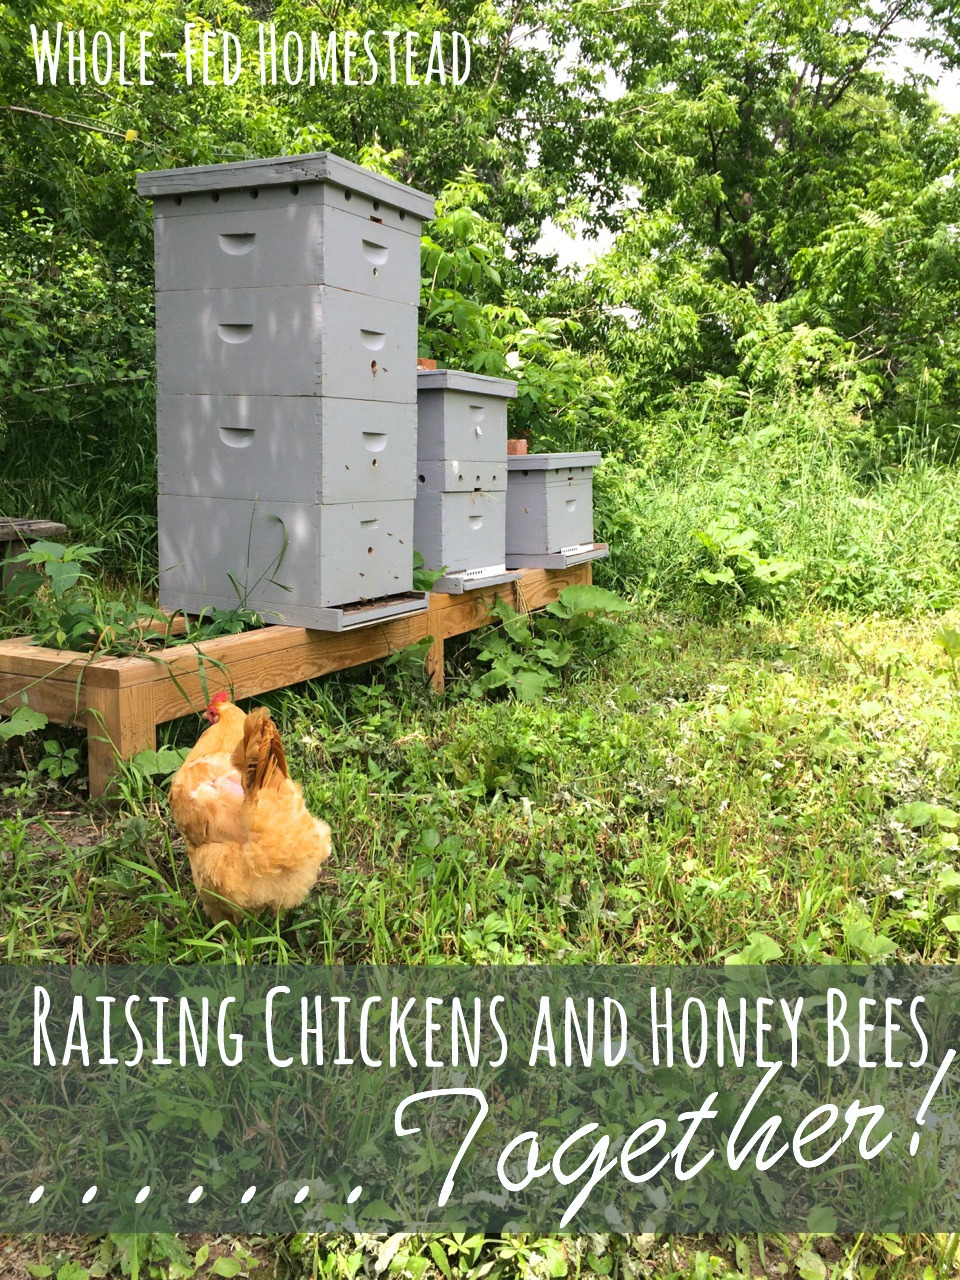 Raising Chickens & Honey Bees Together - Whole-Fed Homestead